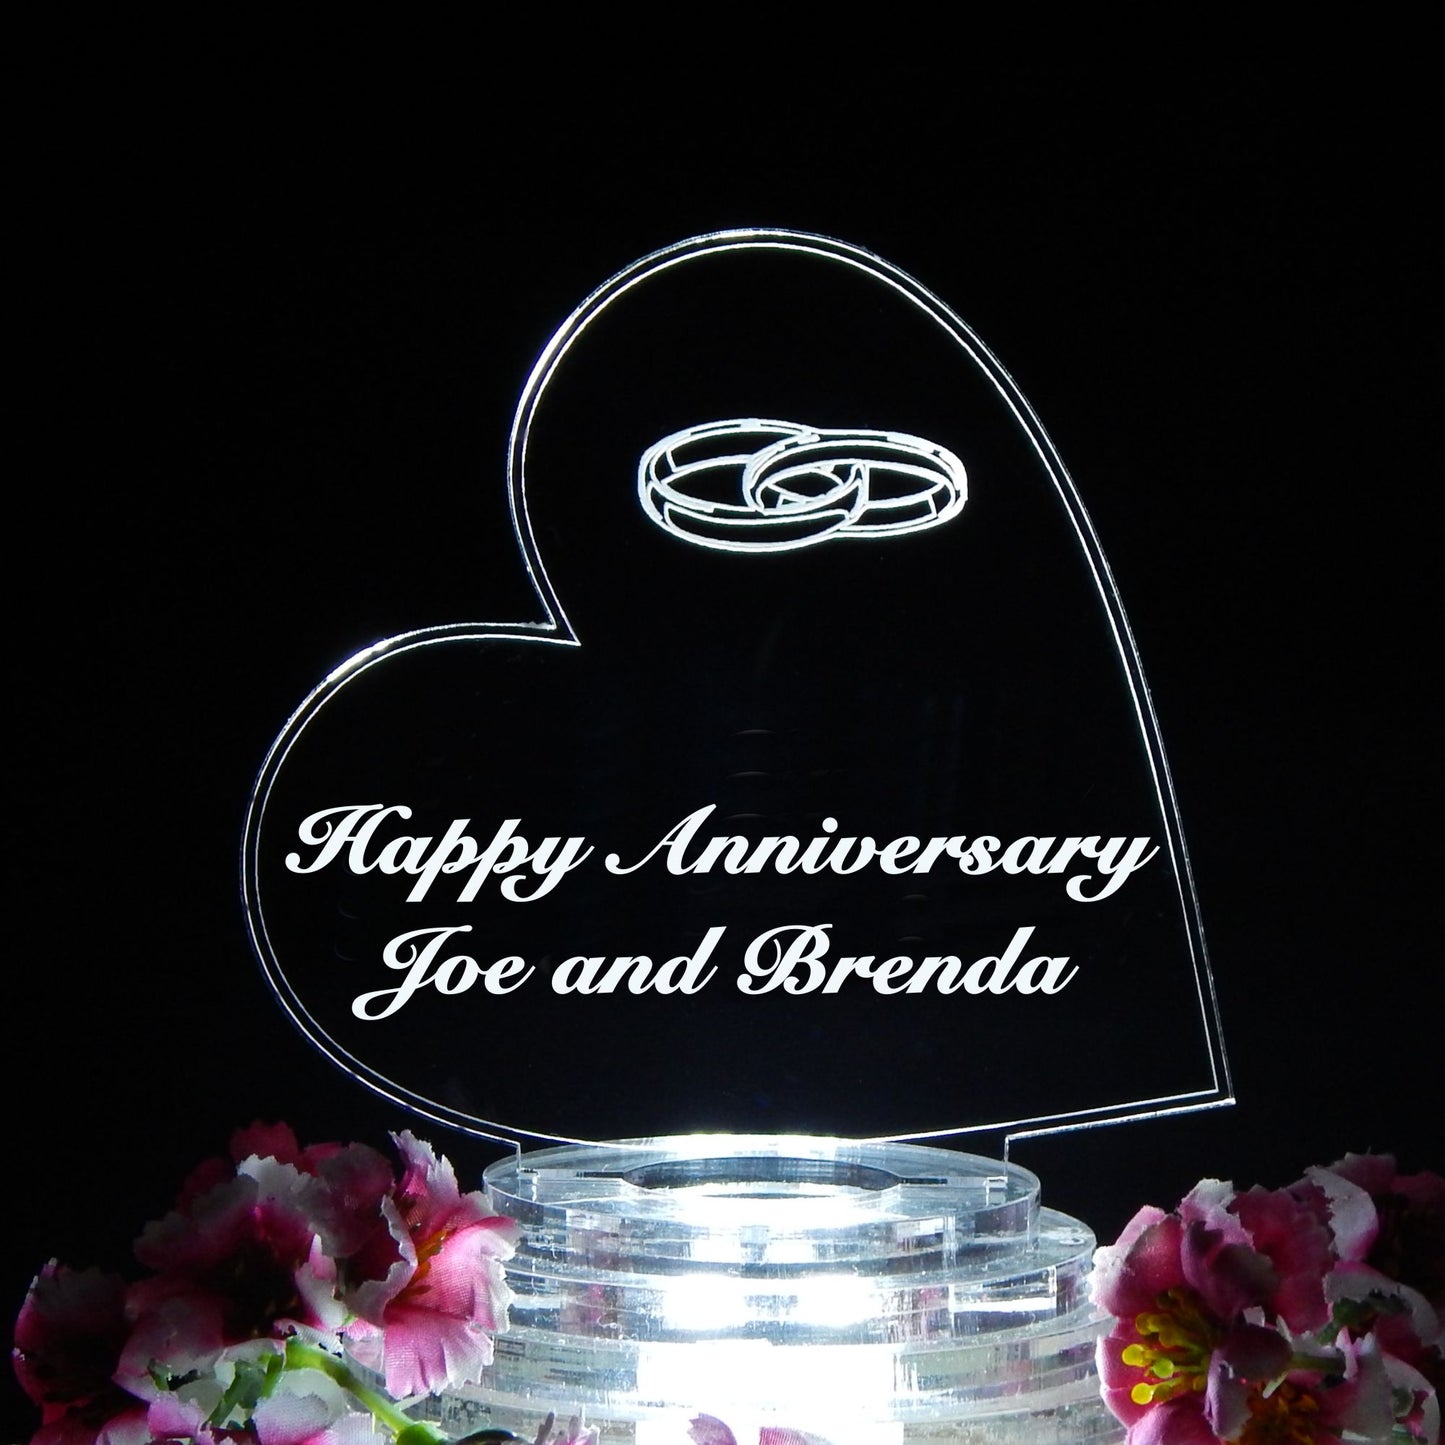 heart shaped acrylic cake topper designed with wedding rings and engraved with Happy Anniversary and names